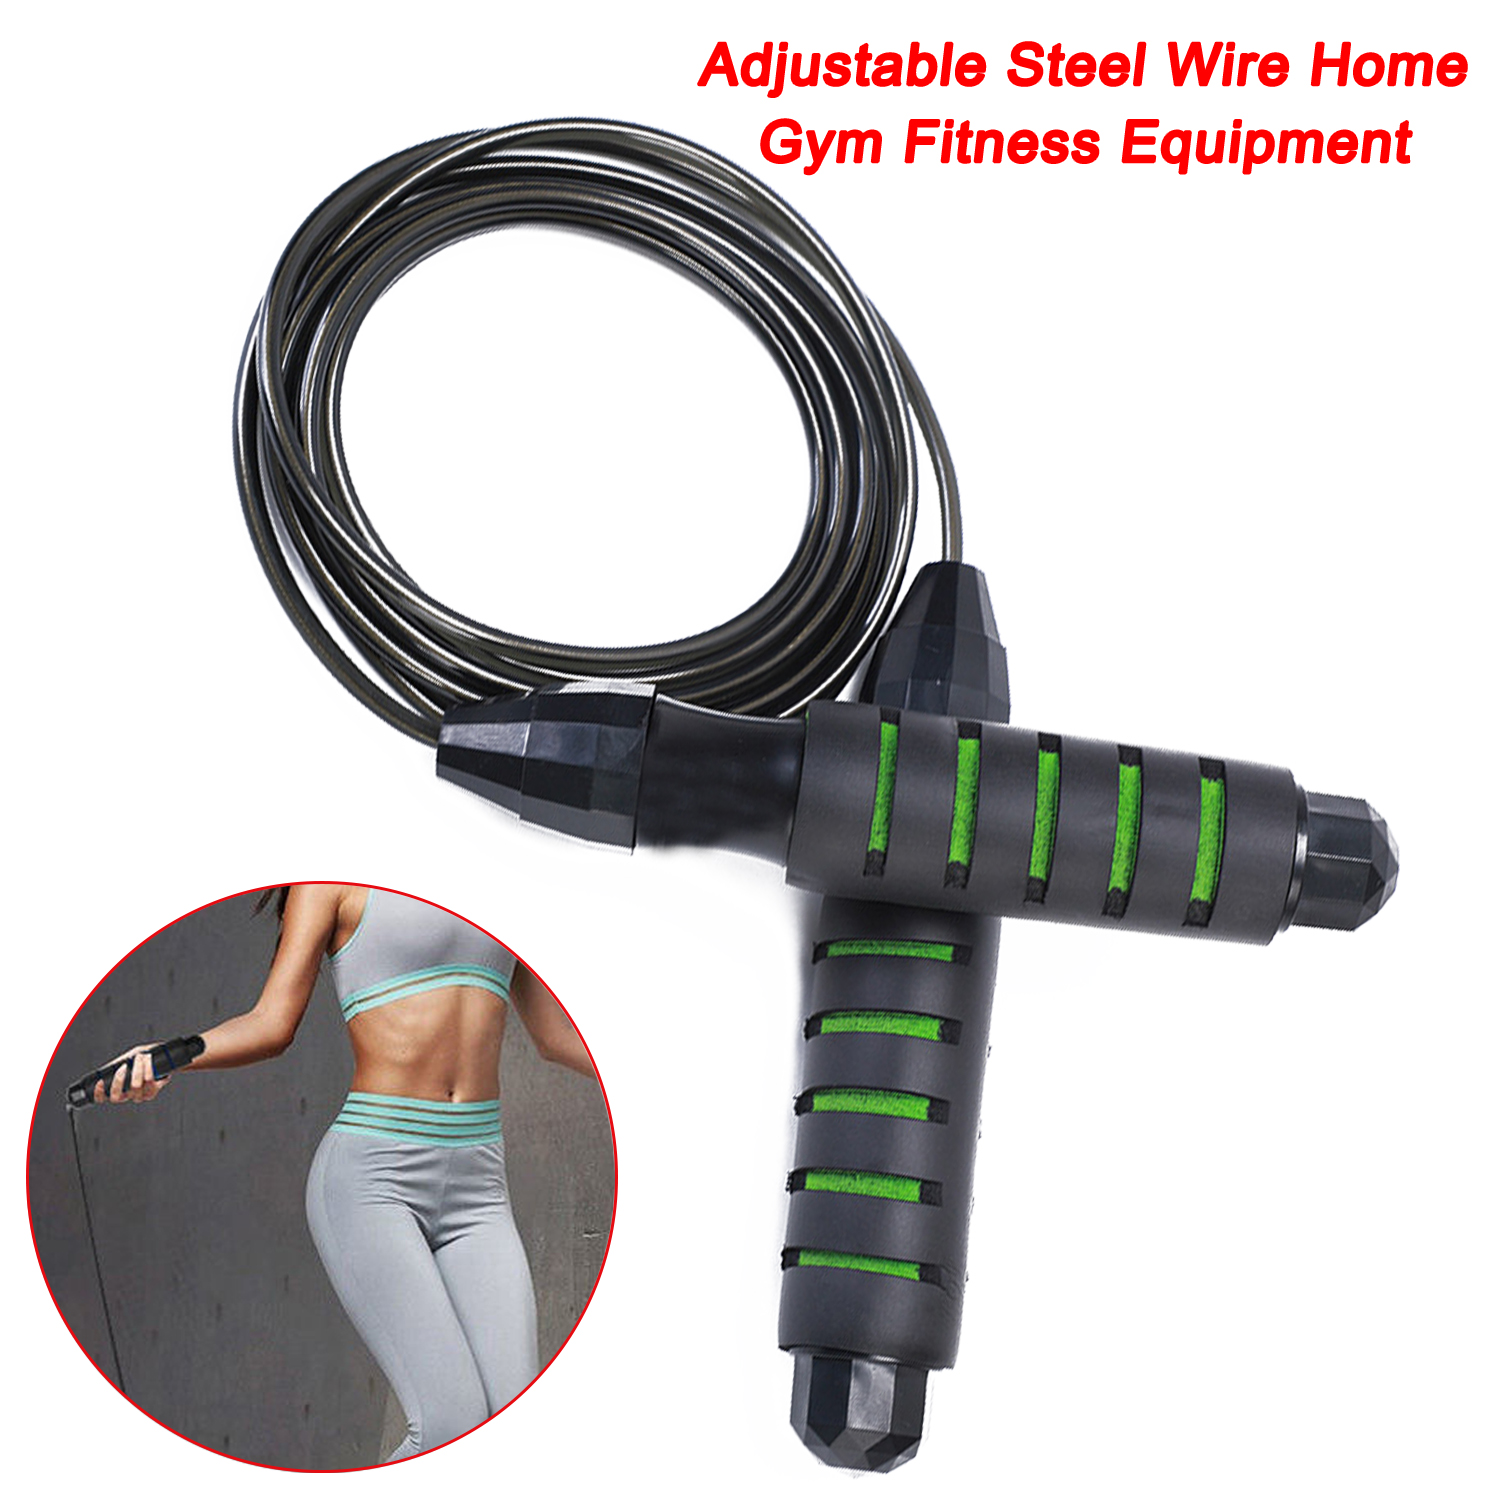 2.8m Long Pvc Steel Skipping Rope Workout Training Gear Adjustable Steel Wire Home Gym Fitness Equipment